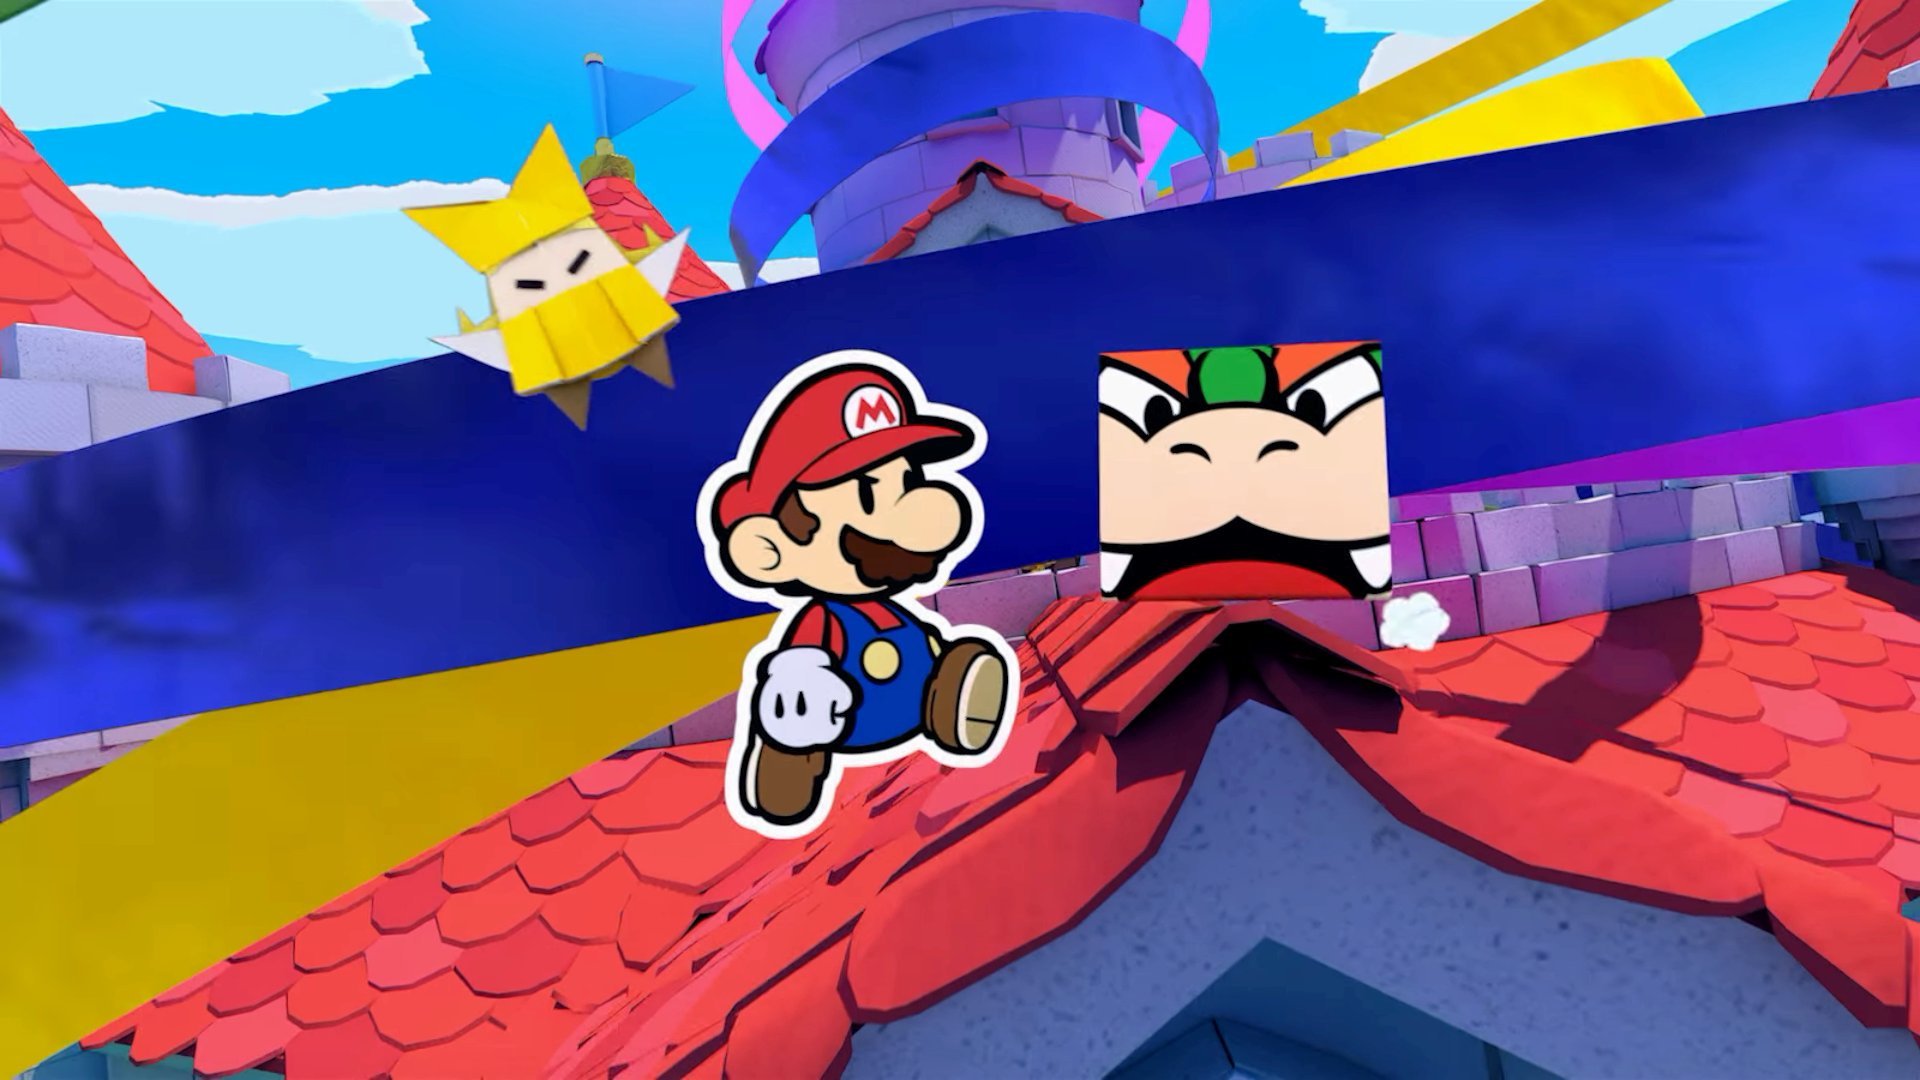 Paper Mario's Switch Reveal Adds More Weight To 64